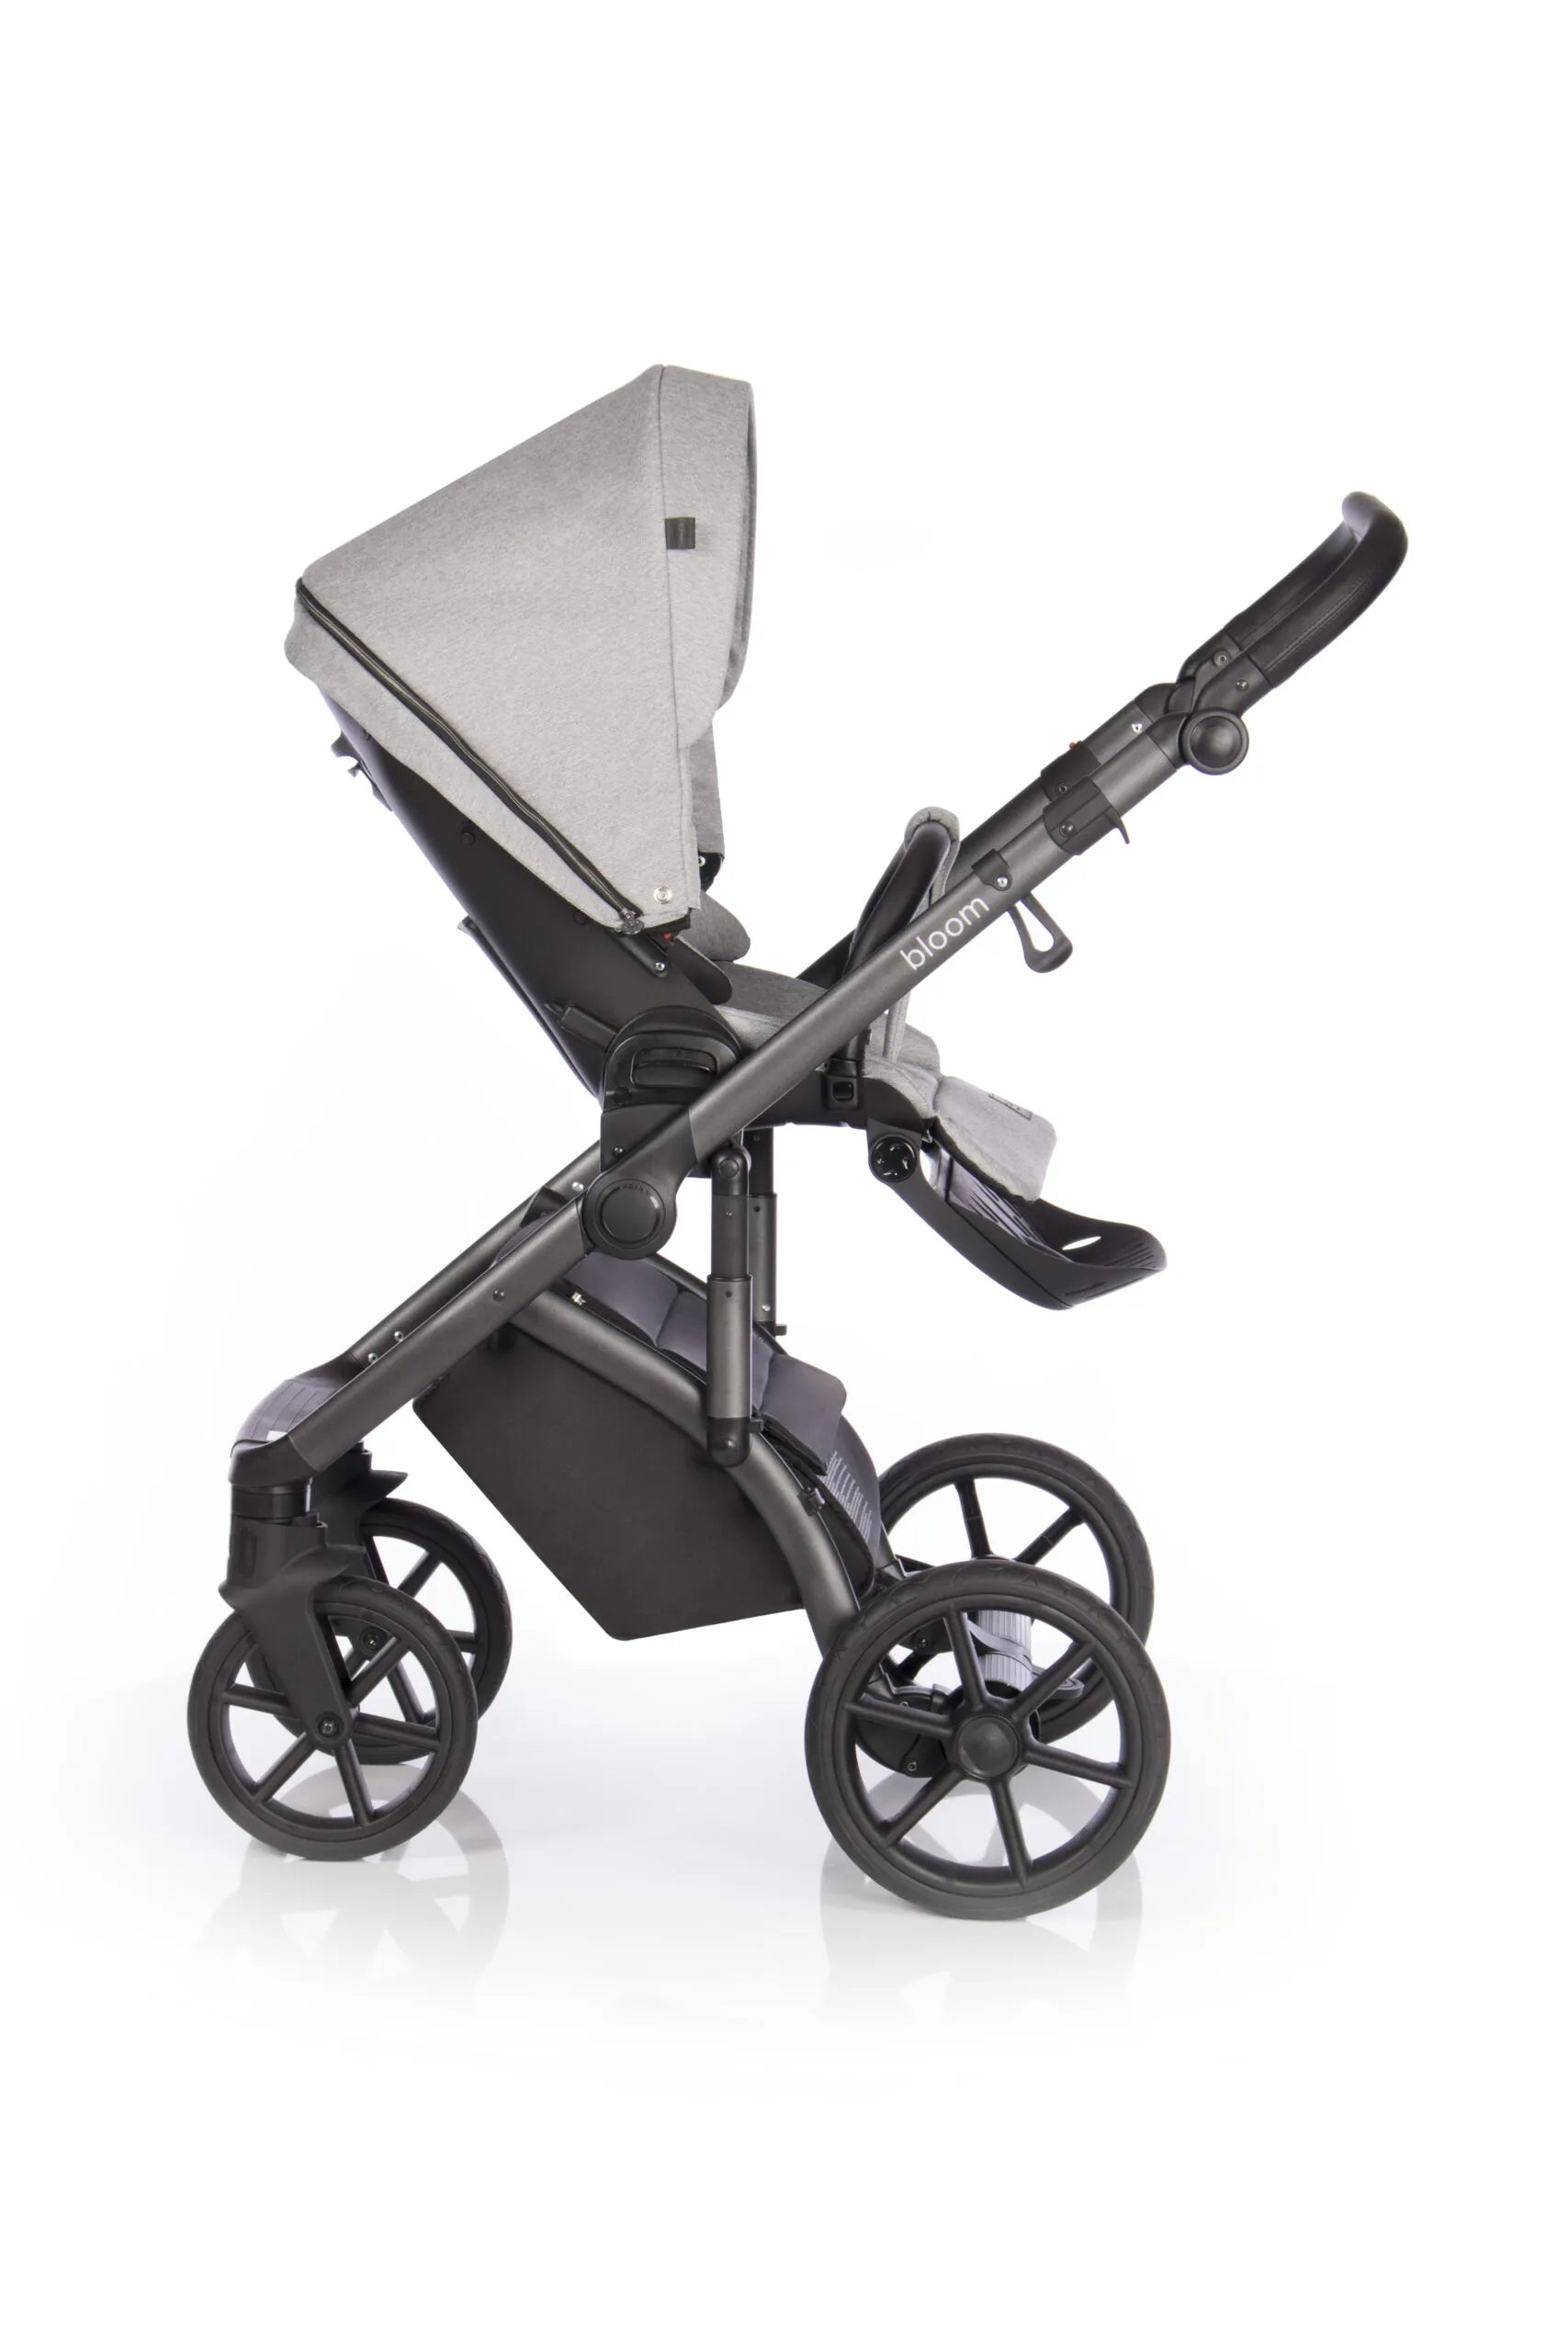 Roan BLOOM baby stroller 2 in 1, carry cot and stroller, color Silver Chevron